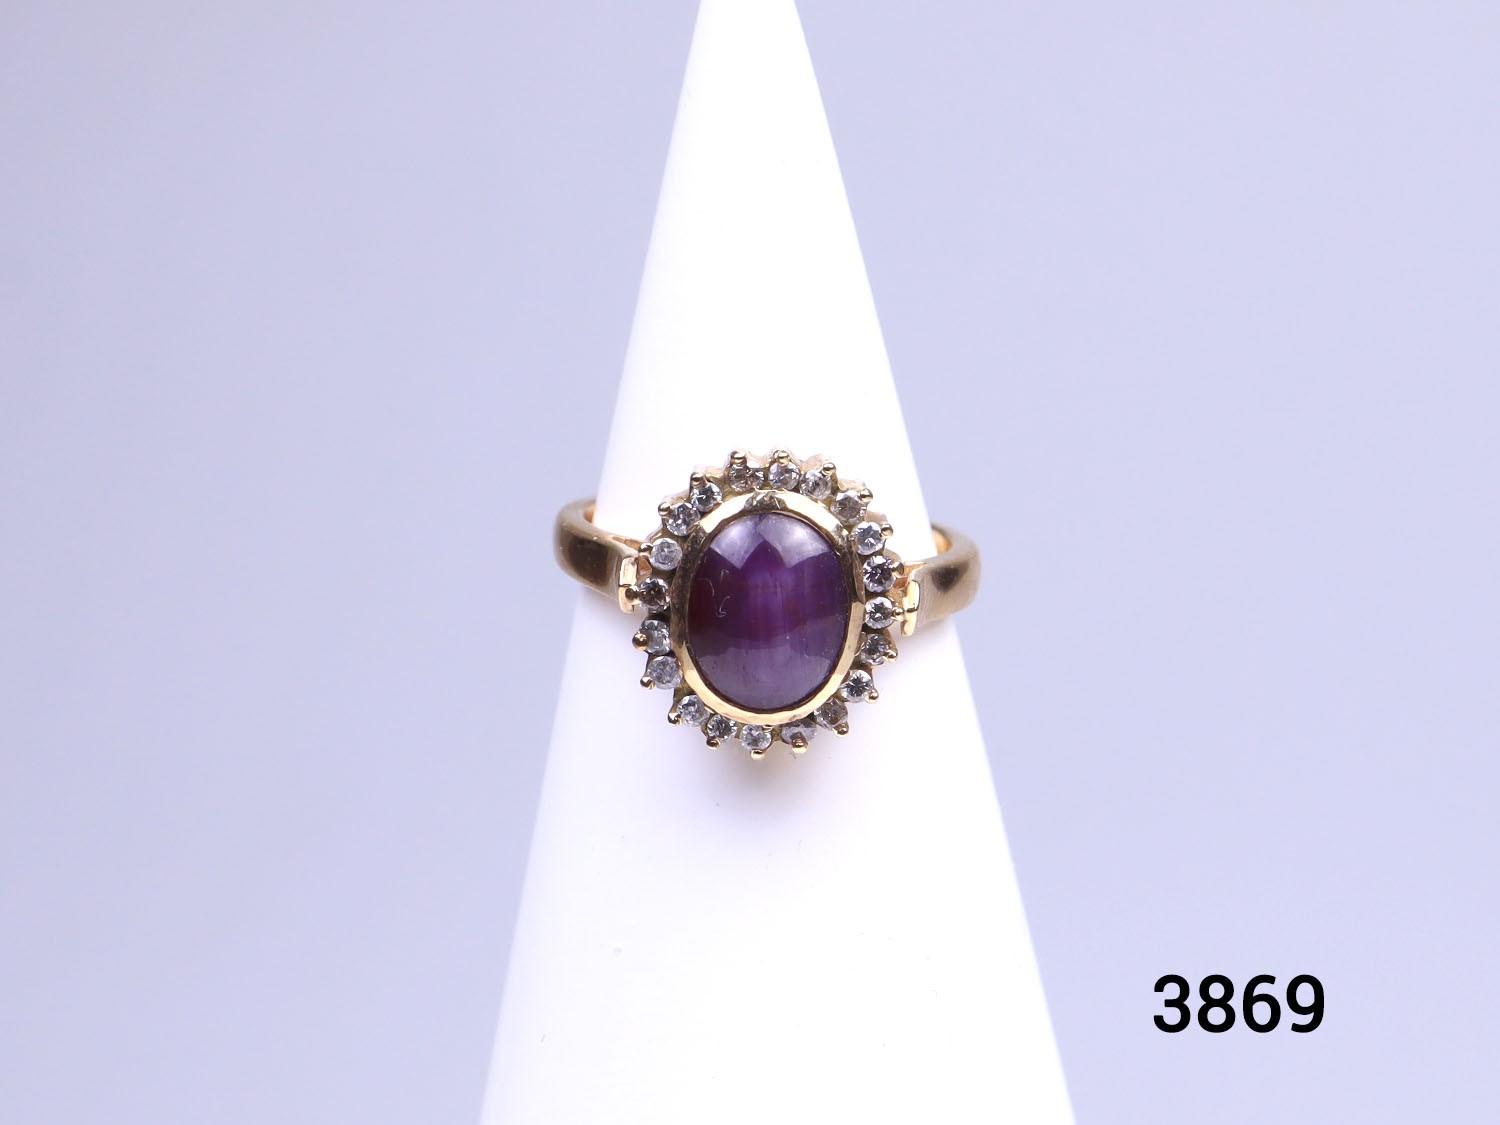 Modern 18 karat gold ring set with star ruby cabochon inside a frame of round cut diamonds. Hallmarked 18k on the inside band. Ring size N / 6.5.  Ring weight 5.9 grams.  Box included.  Main photo of ring on a white cone display stand shown straight on